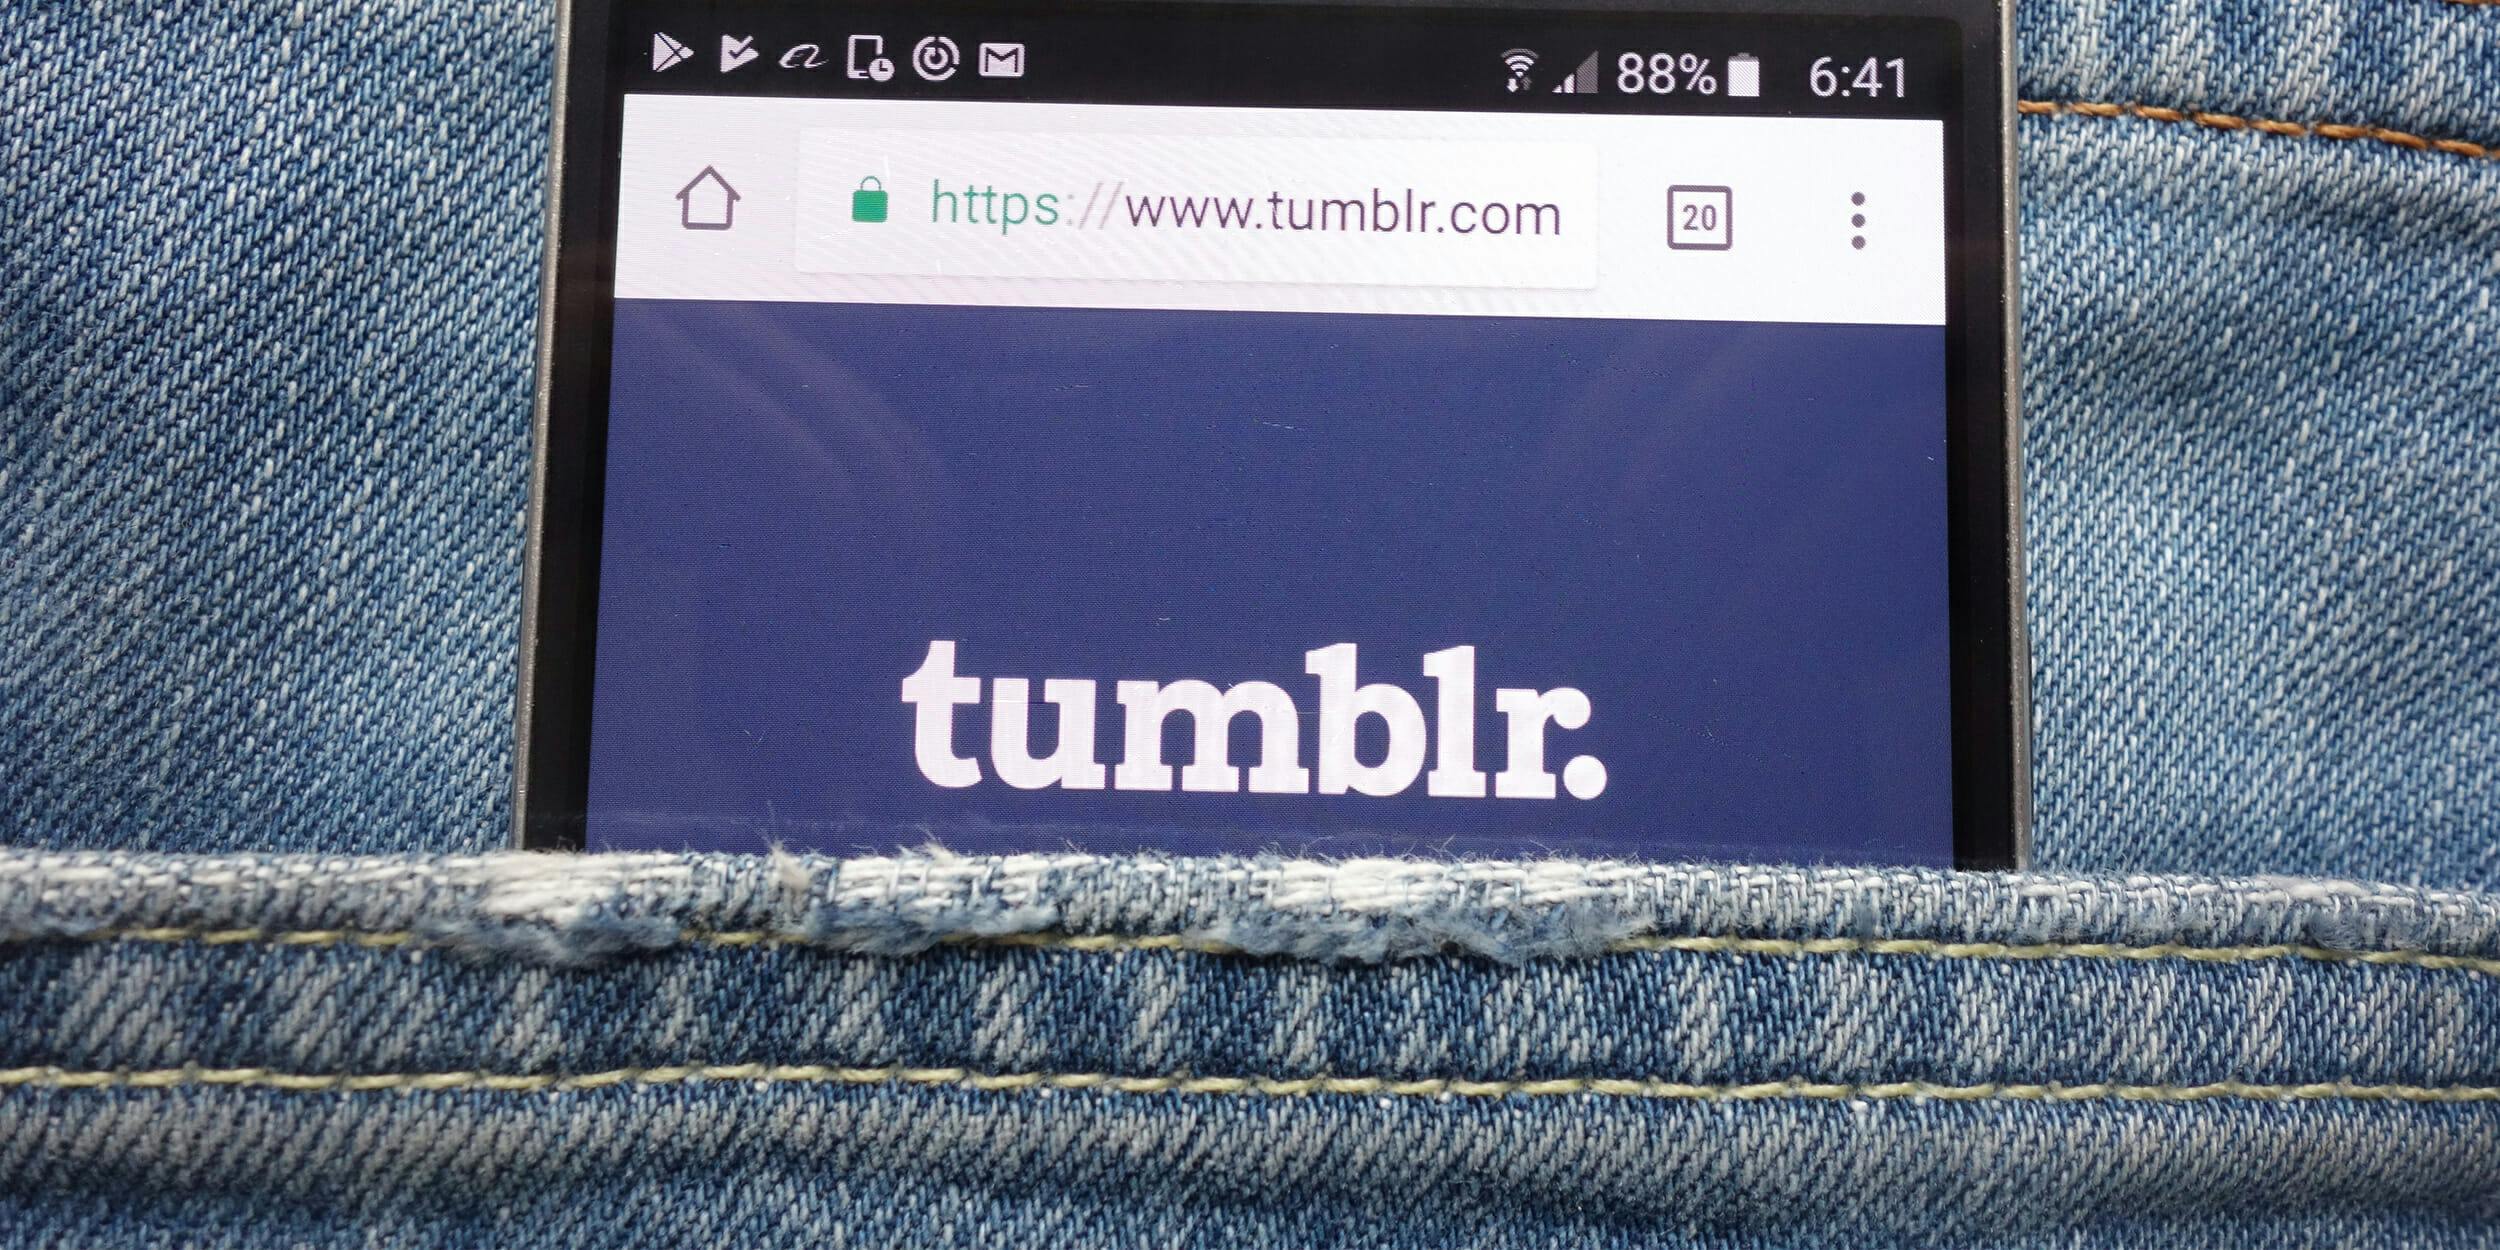 ashley bourgeois recommends most popular porn tumblr pic